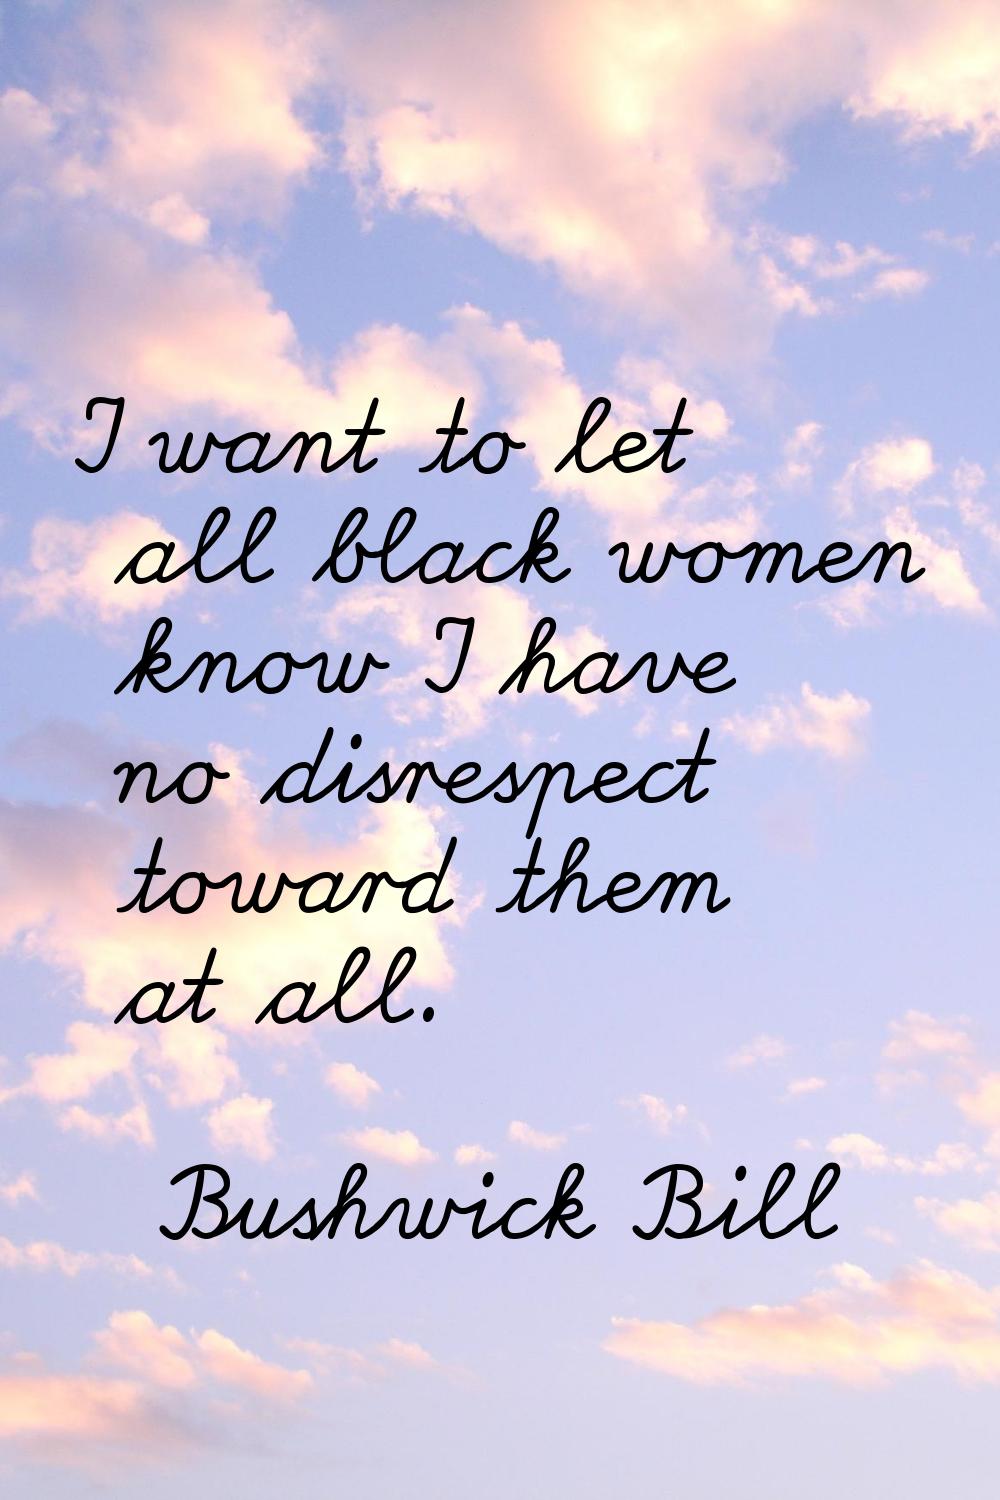 I want to let all black women know I have no disrespect toward them at all.